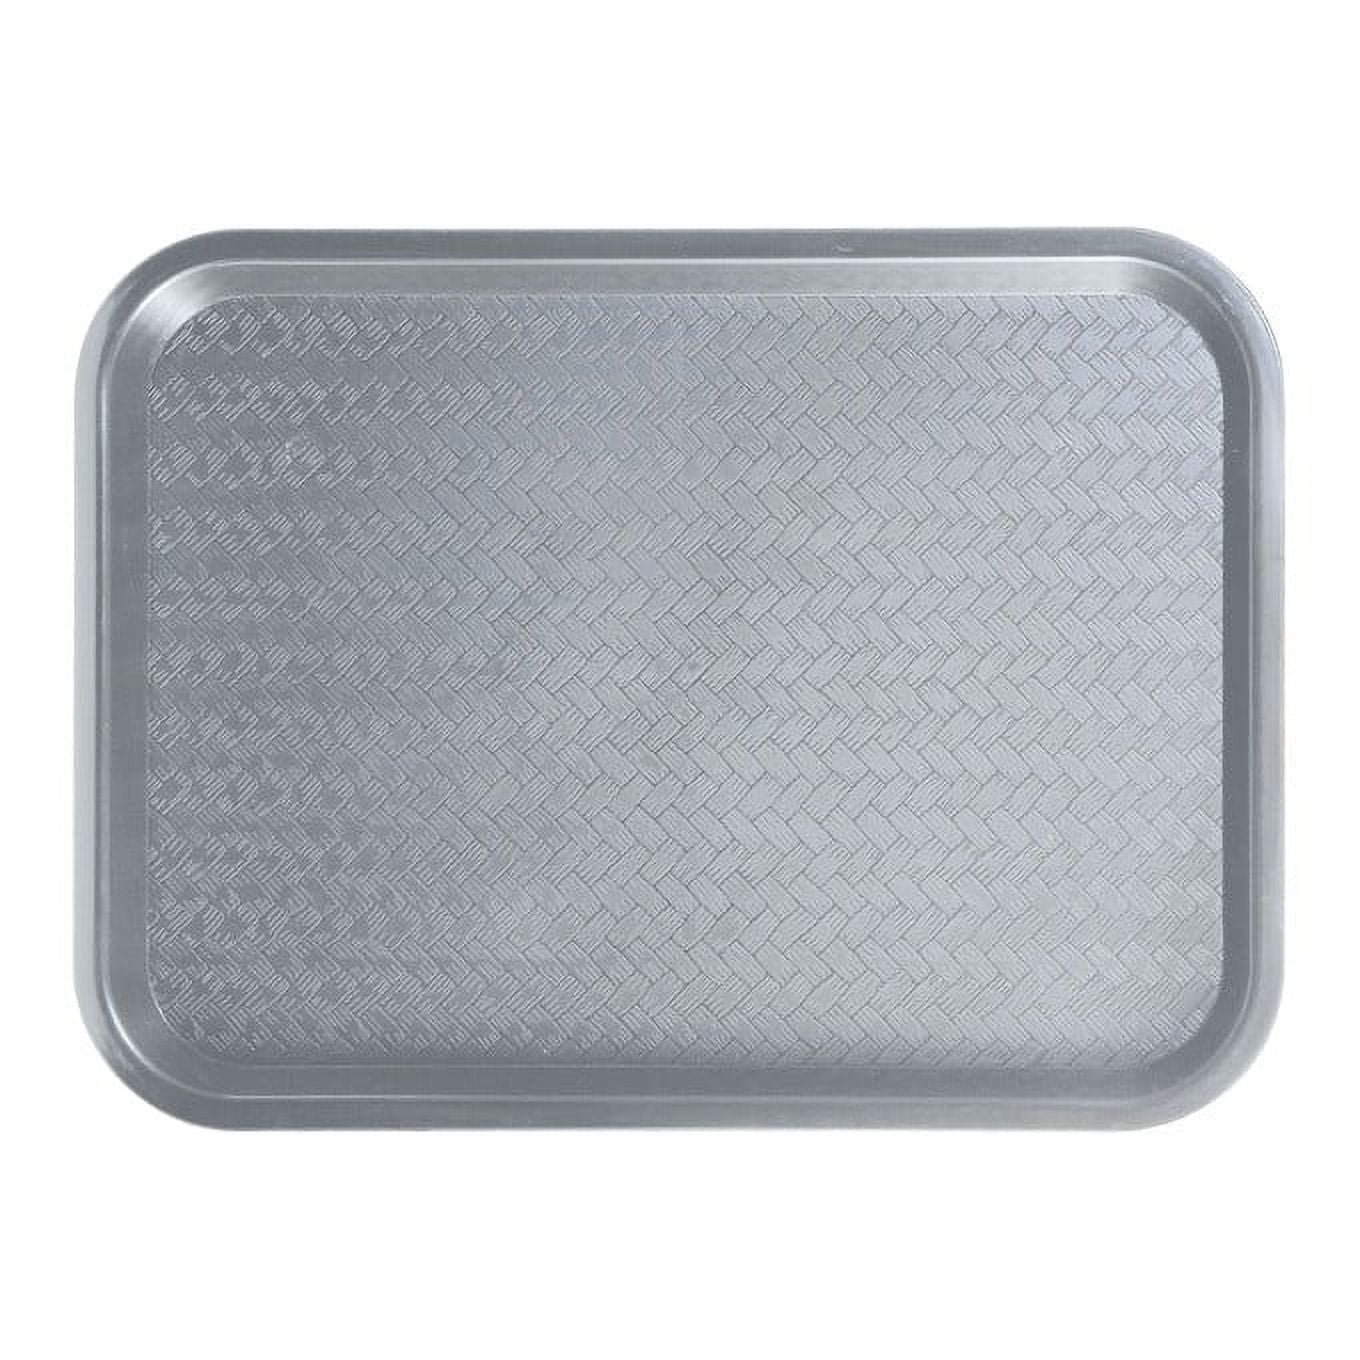 Fast Food Tray, 12 x 16, Gray, Pack of 24